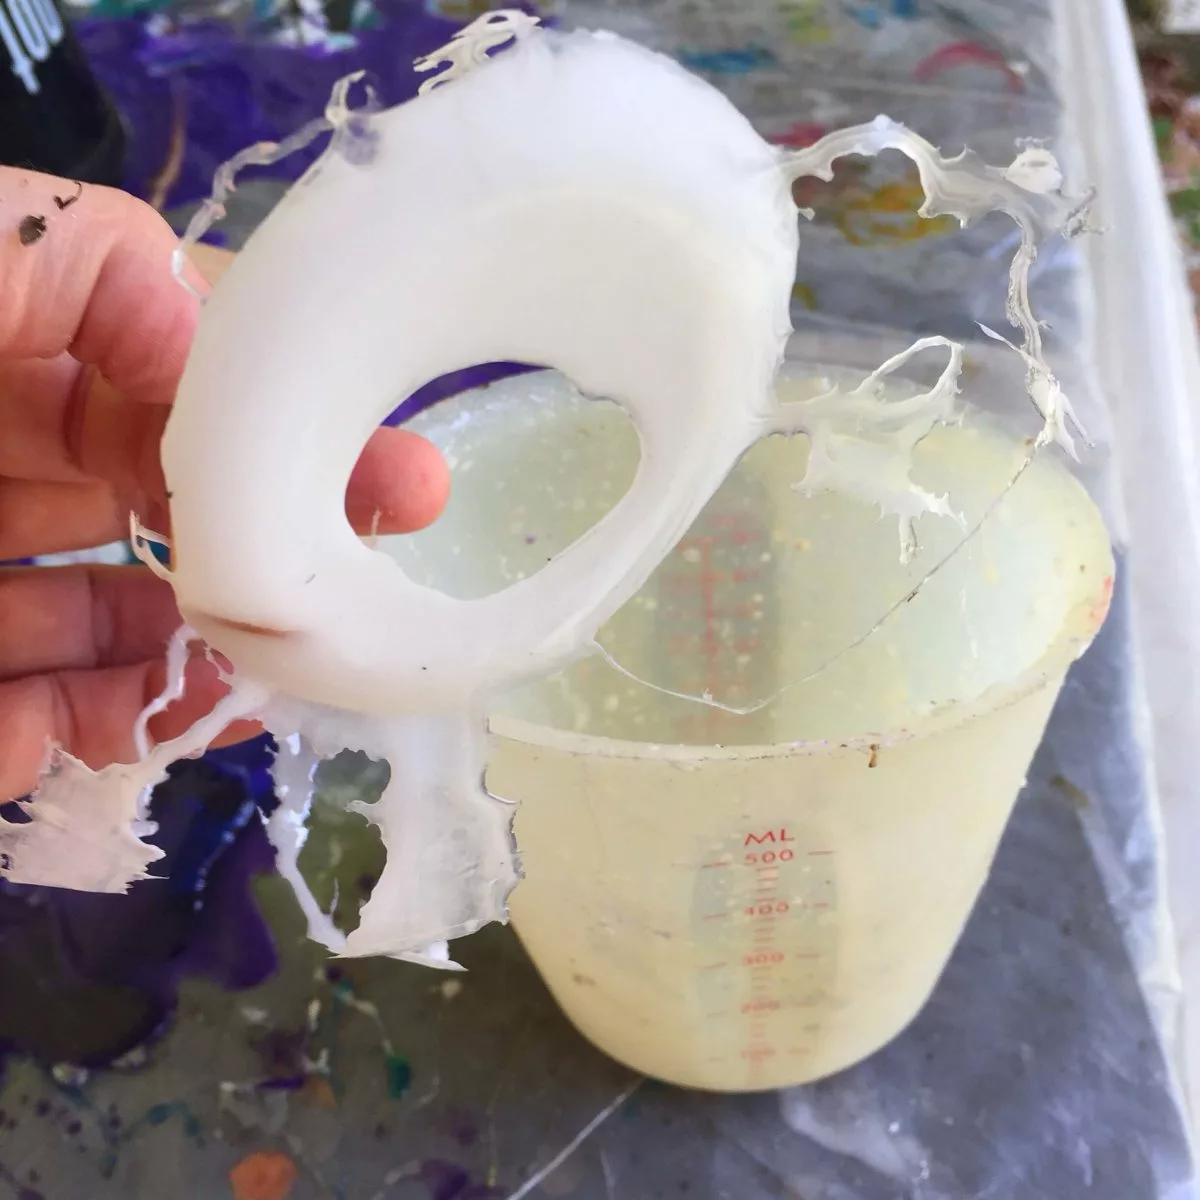 How to Clean your Resin Silicone Mixing Cups 